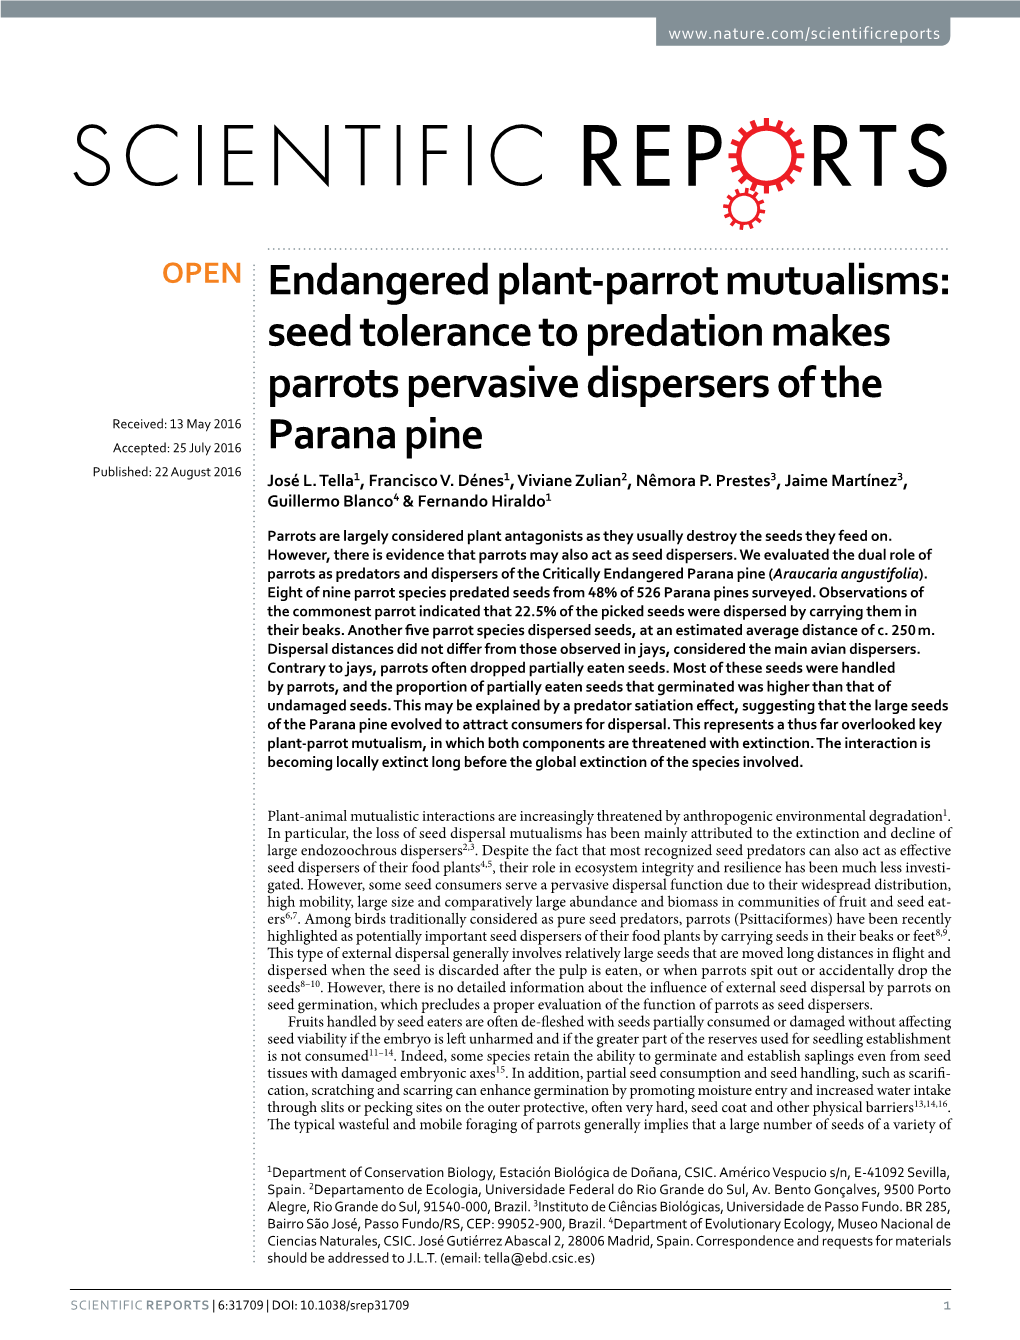 Endangered Plant-Parrot Mutualisms: Seed Tolerance to Predation Makes